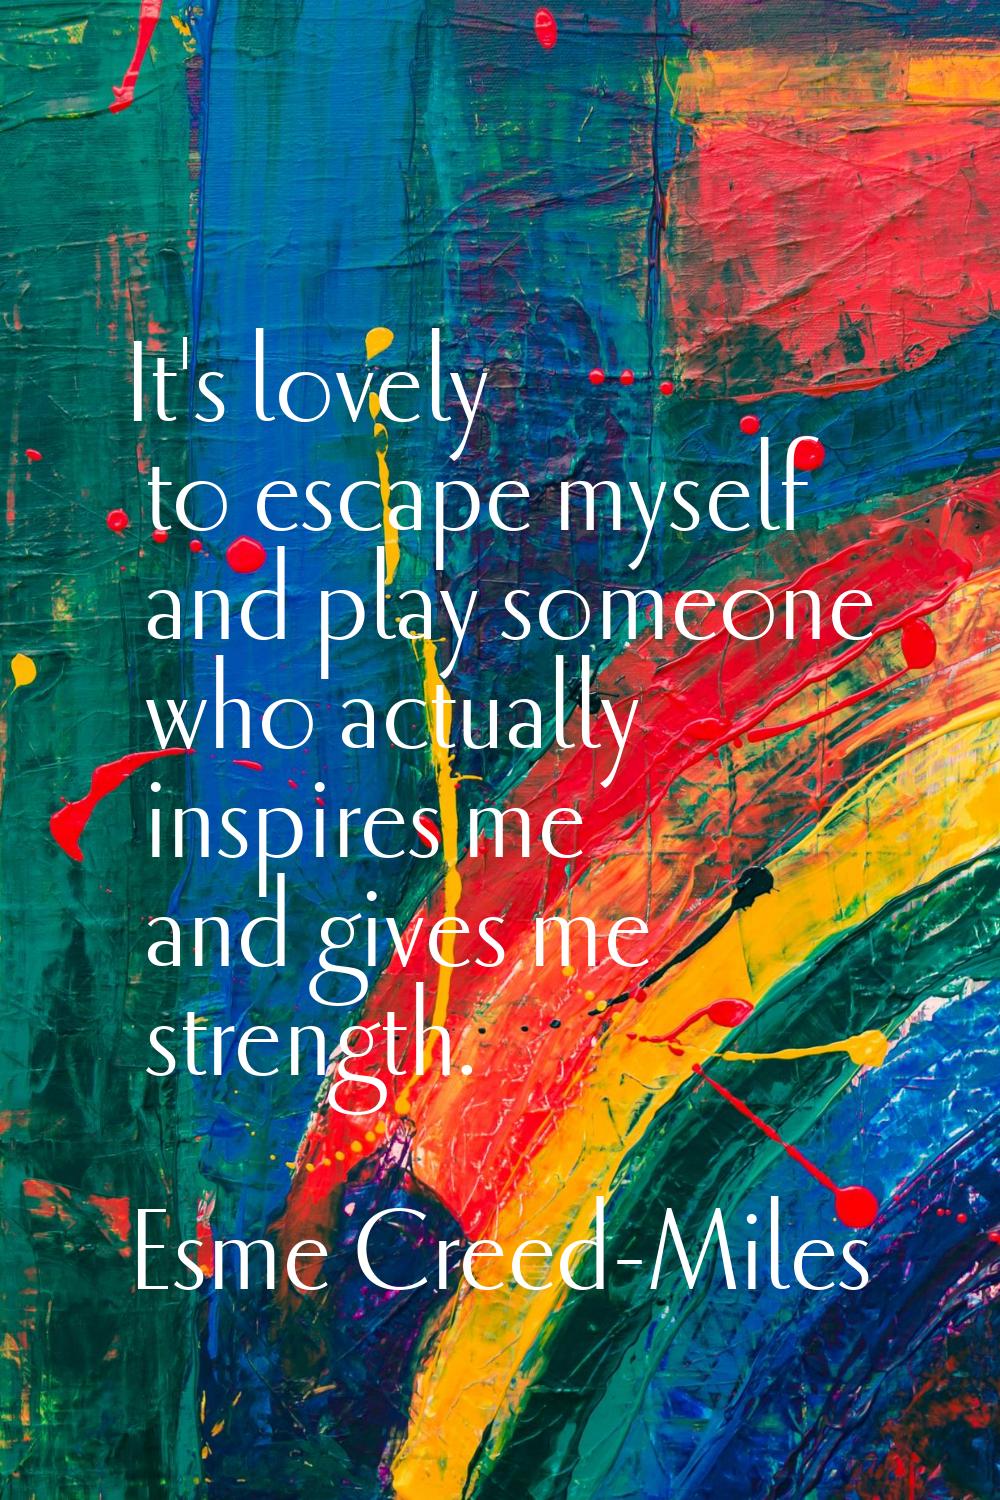 It's lovely to escape myself and play someone who actually inspires me and gives me strength.